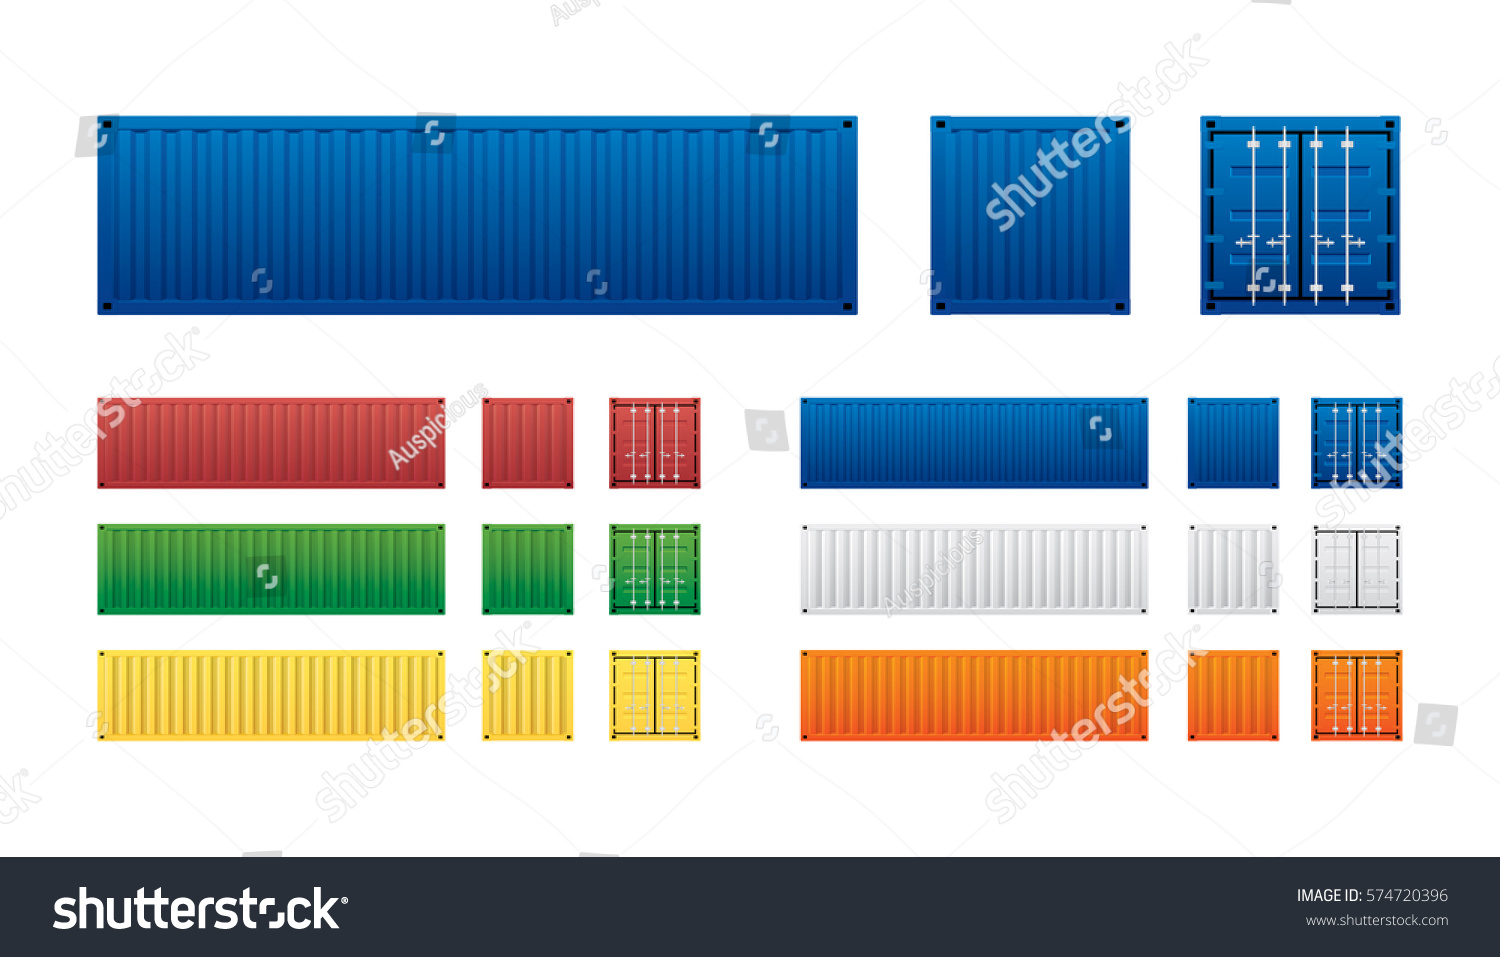 SVG of Vector of colorful cargo shipping containers for freight transport and global logistics in different view isolated on white background. svg